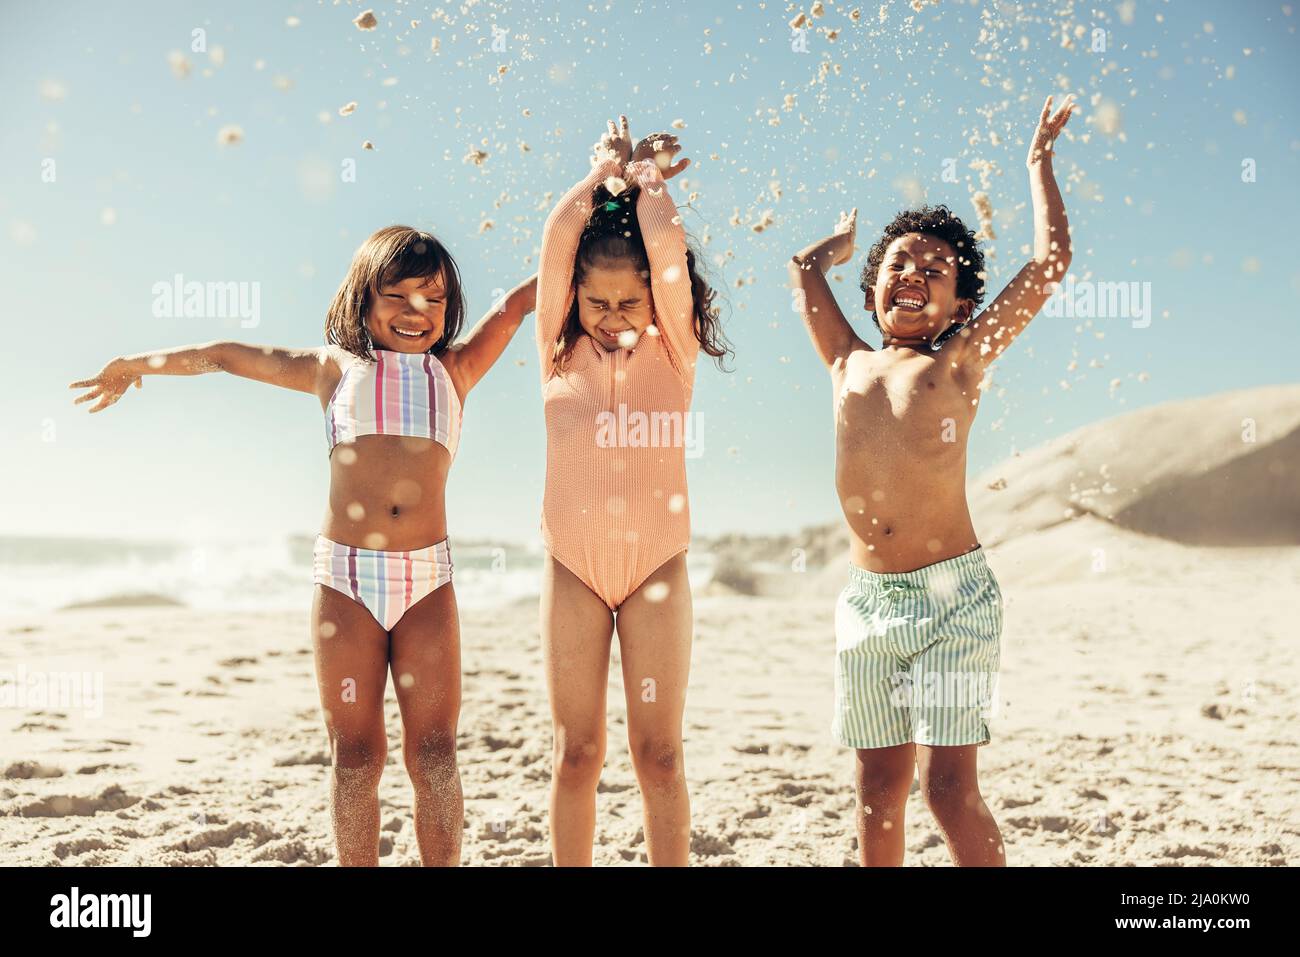 Adorable little kids having fun while throwing beach sand into the air. Group of three happy young children enjoying their summer vacation at a sunny Stock Photo